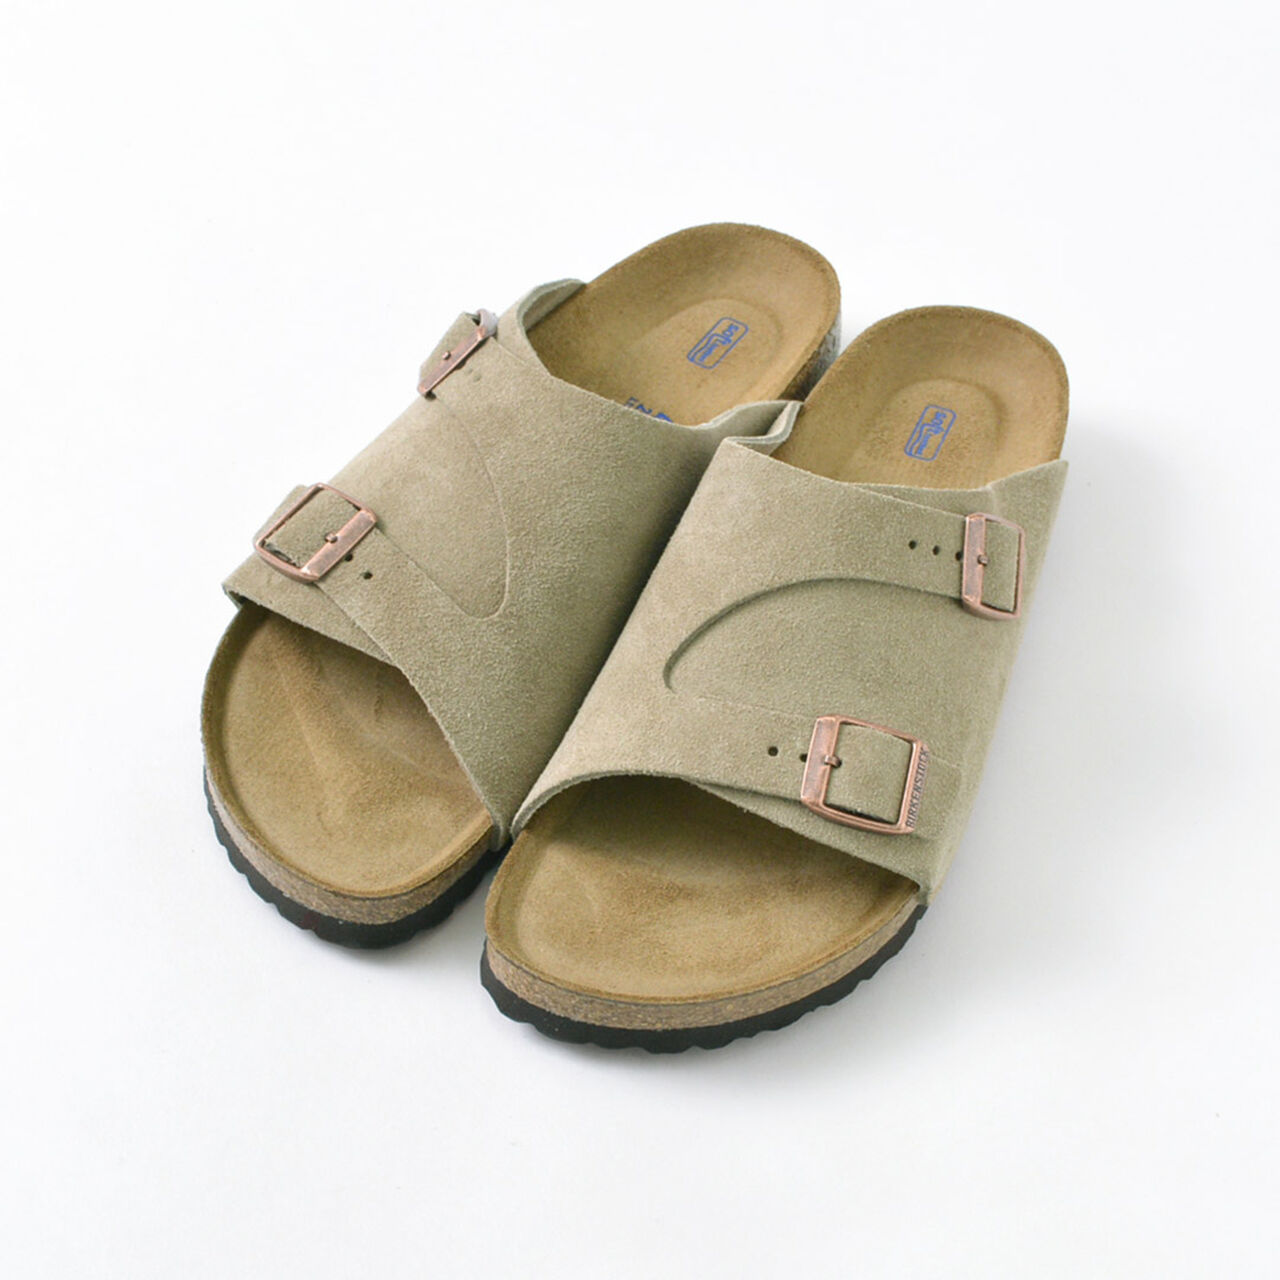 Zurich suede sandals,Taupe, large image number 0